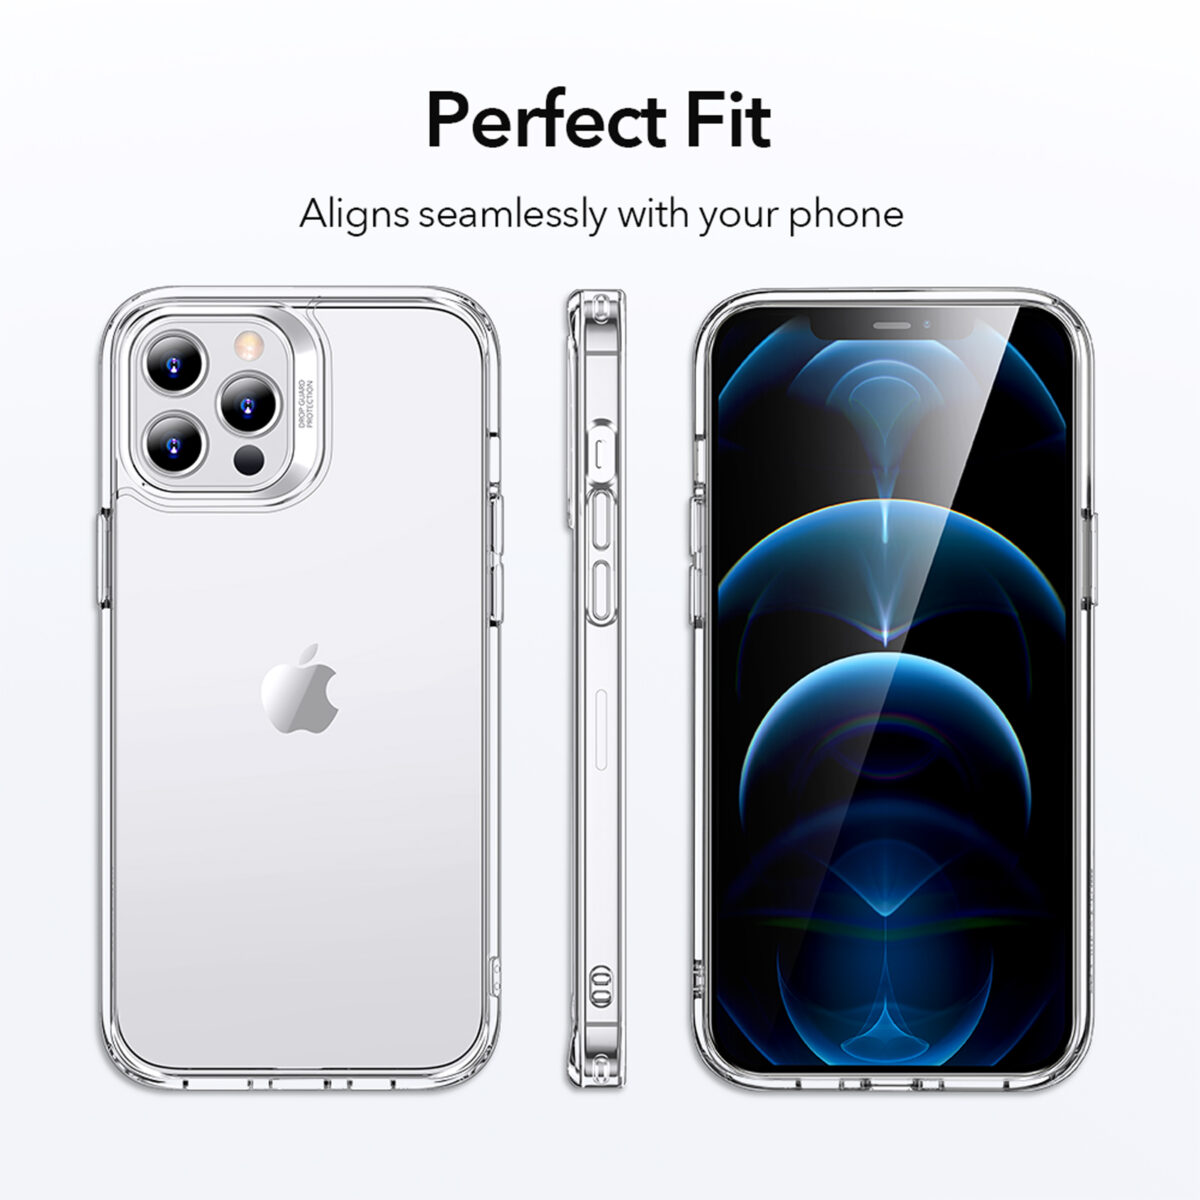 iPhone 12 Pro Soft silicone case